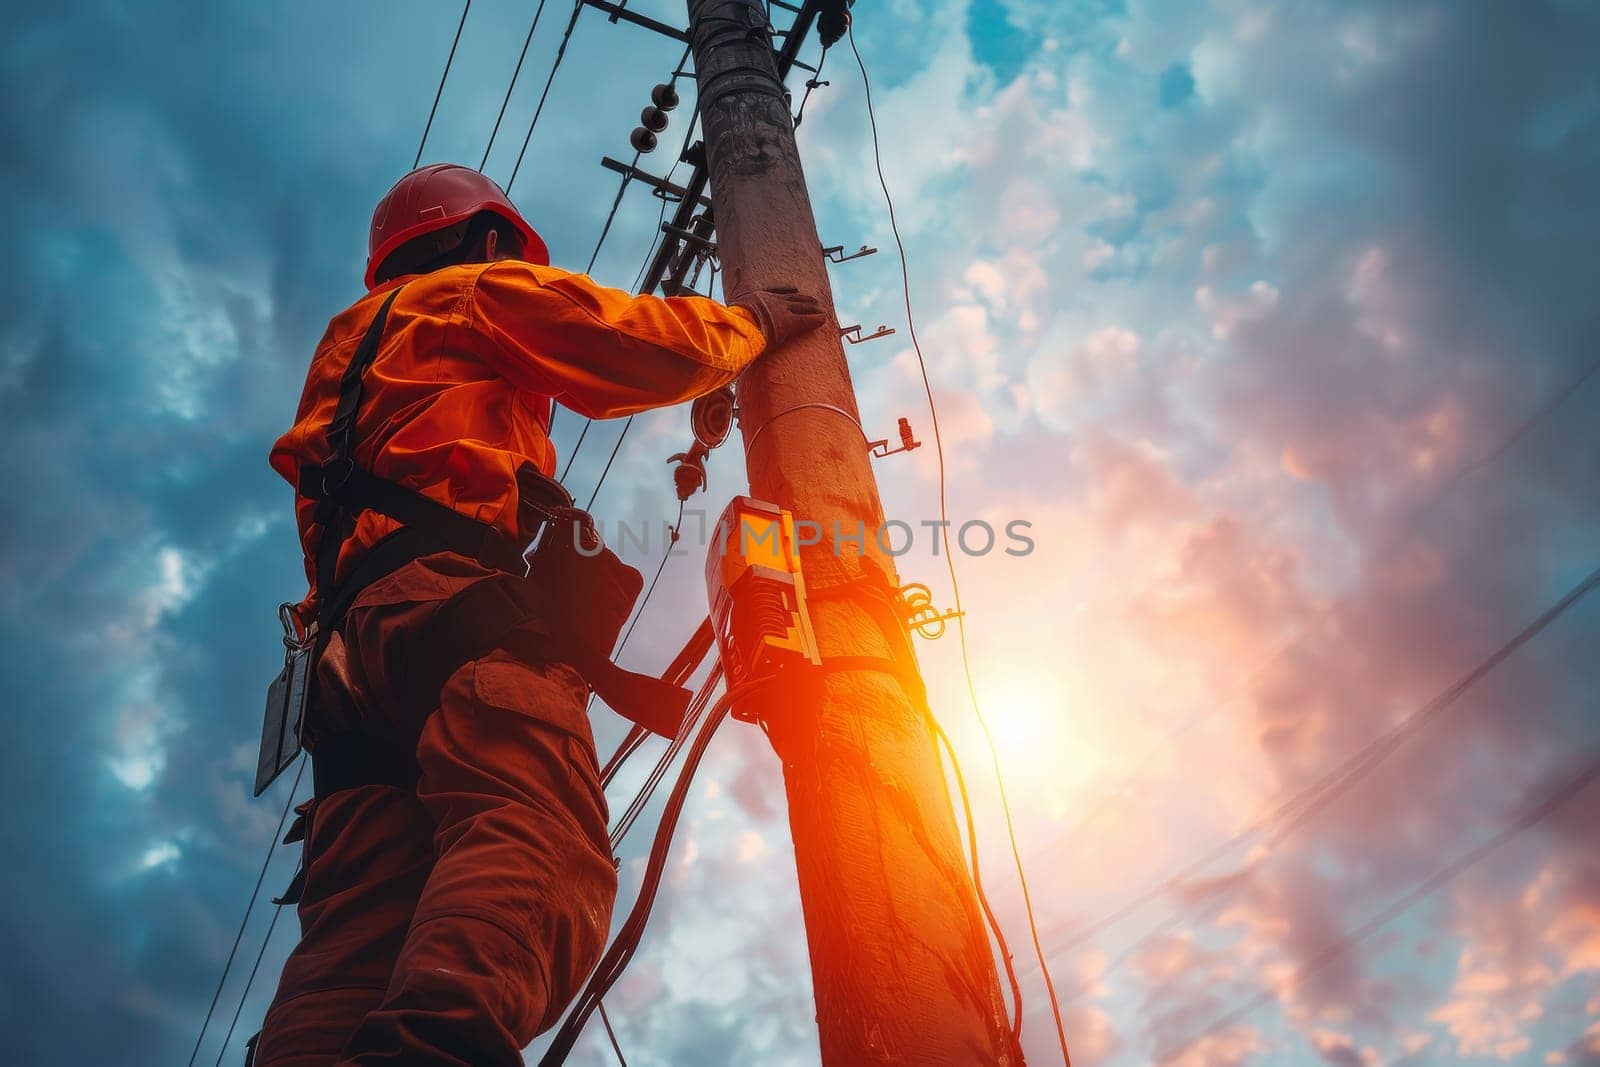 A man in an orange safety vest is working on a power line. The sky is blue and there are clouds in the background